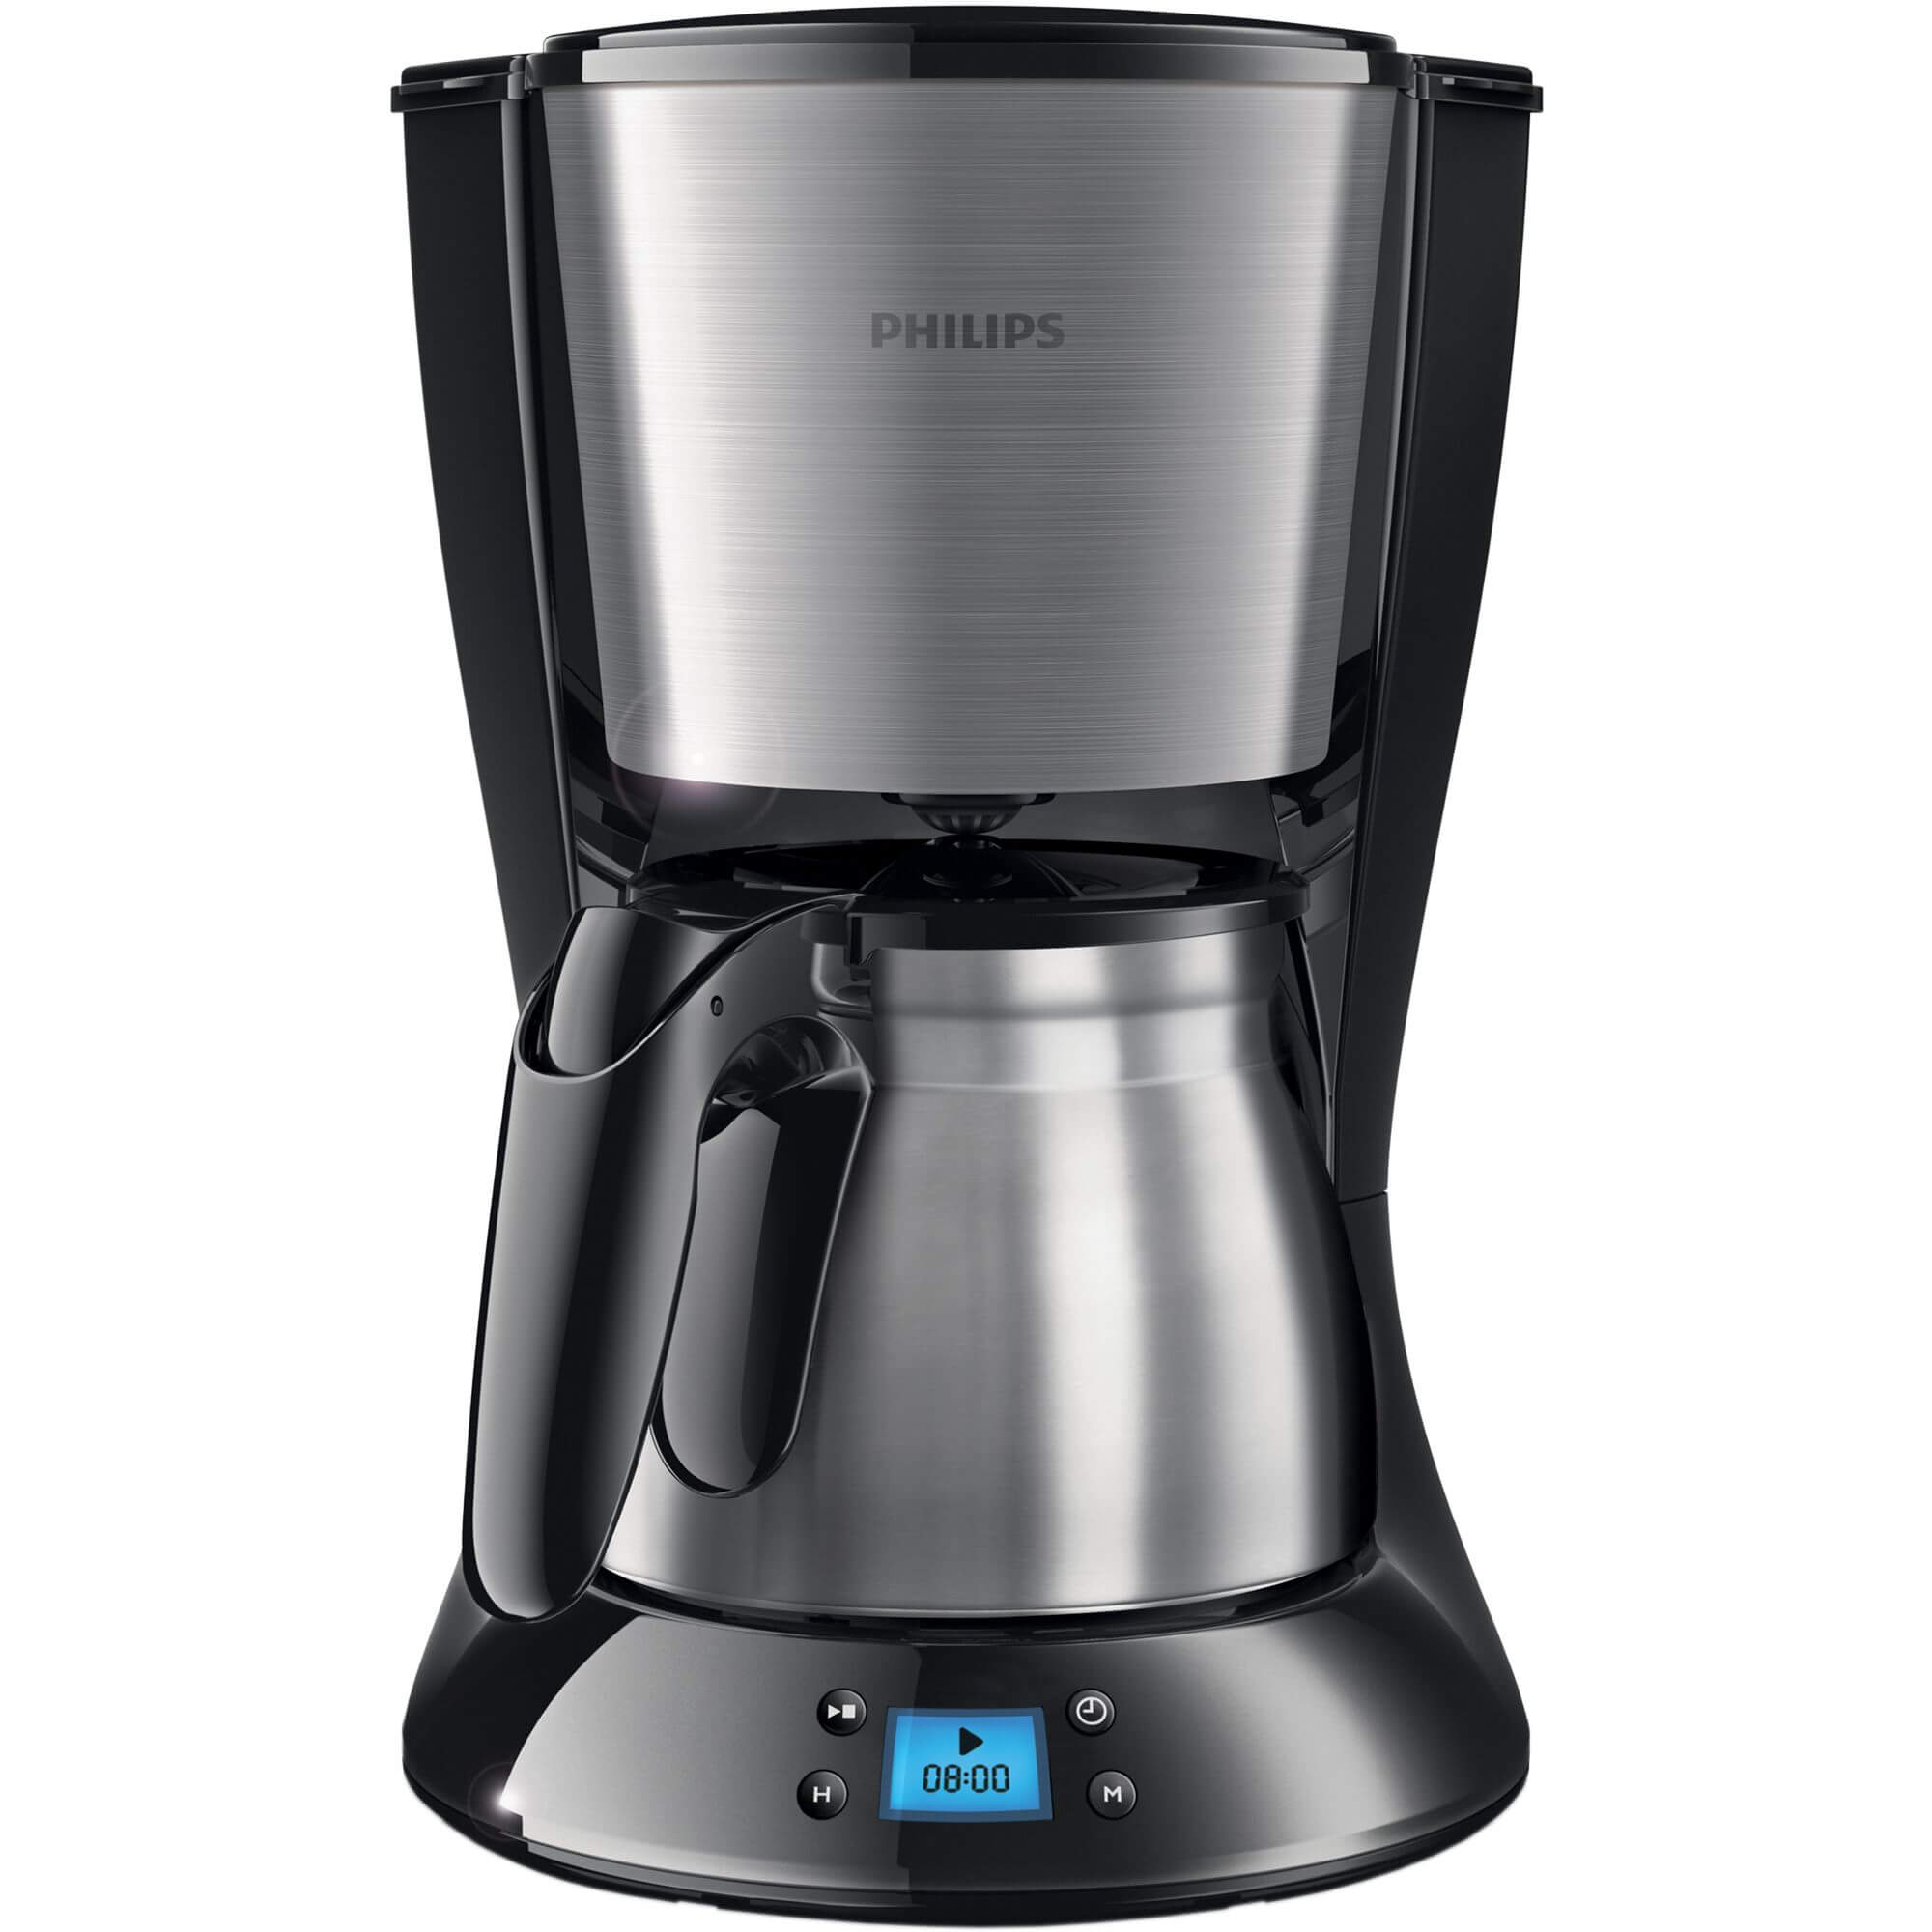  Cafetiera Philips Daily Collection HD7470/20, 1000 W, 1.2 l, Negru 